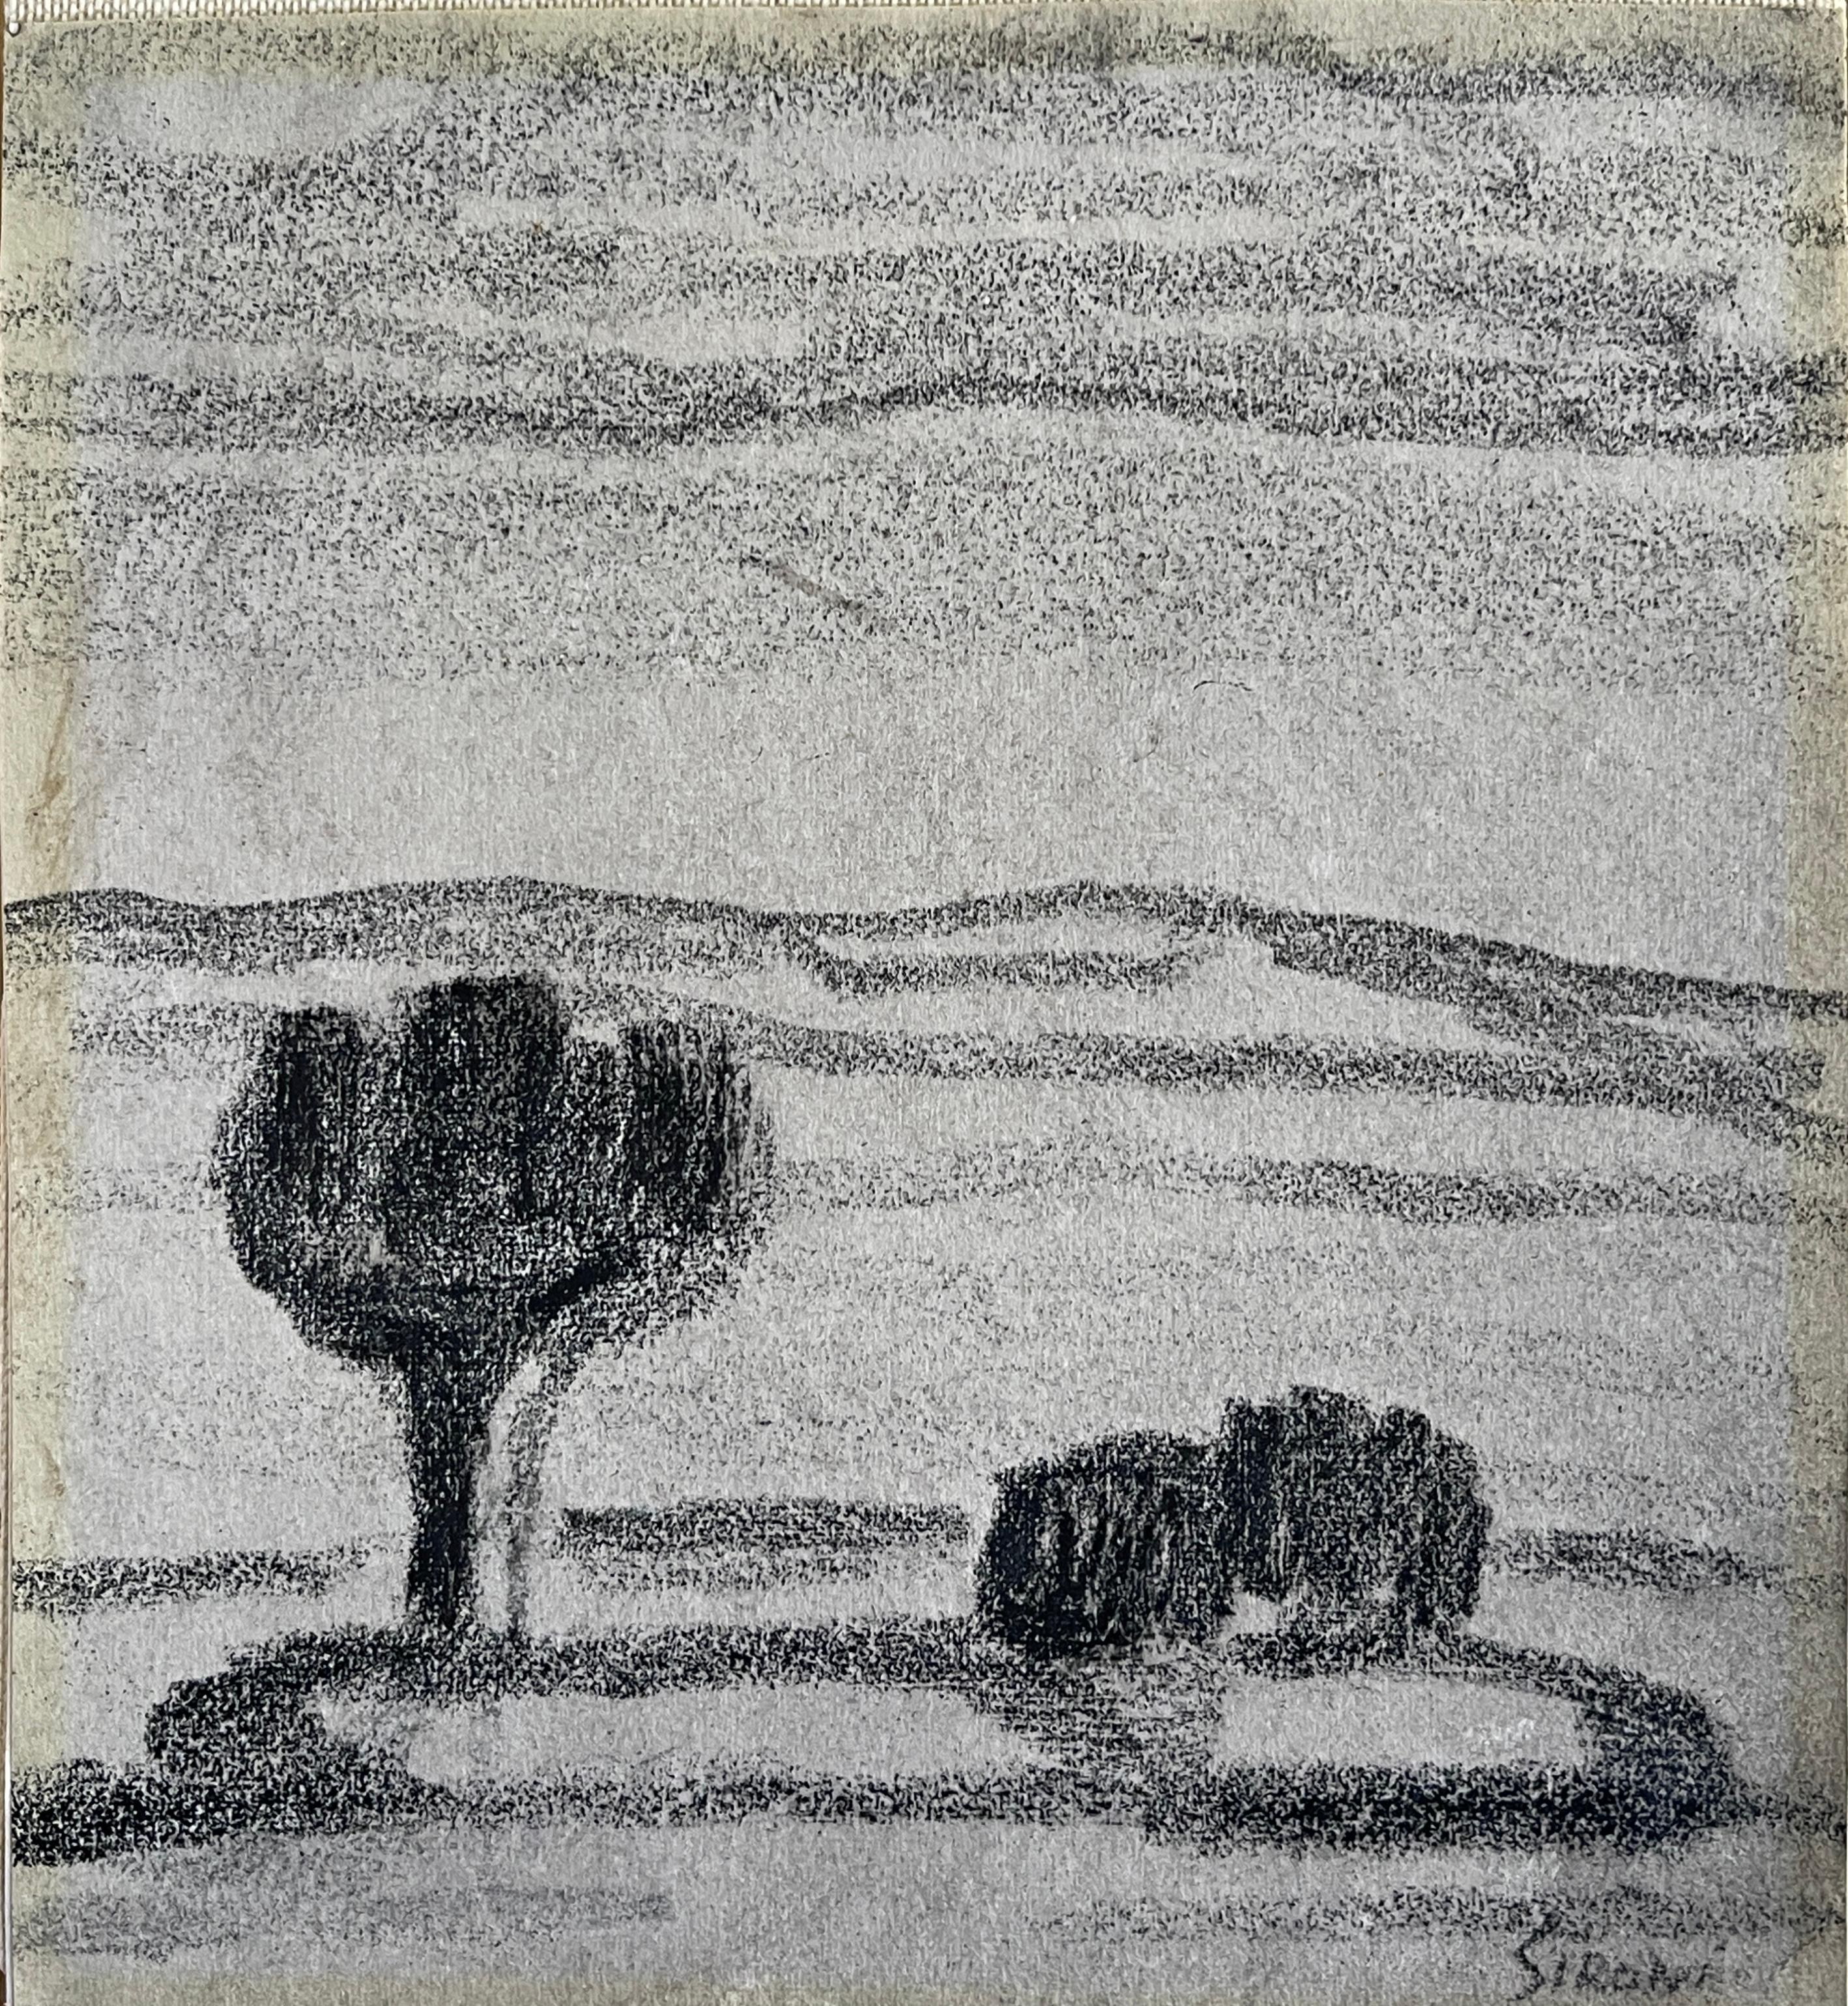 Drawing on cardboard, landscape with tree, Sironi
Drawing made on paper, depicting a landscape with a tree in the foreground, signed lower right.
Made in pencil and tempera.
The drawing is mounted on a canvas base and preserved inside a frame under